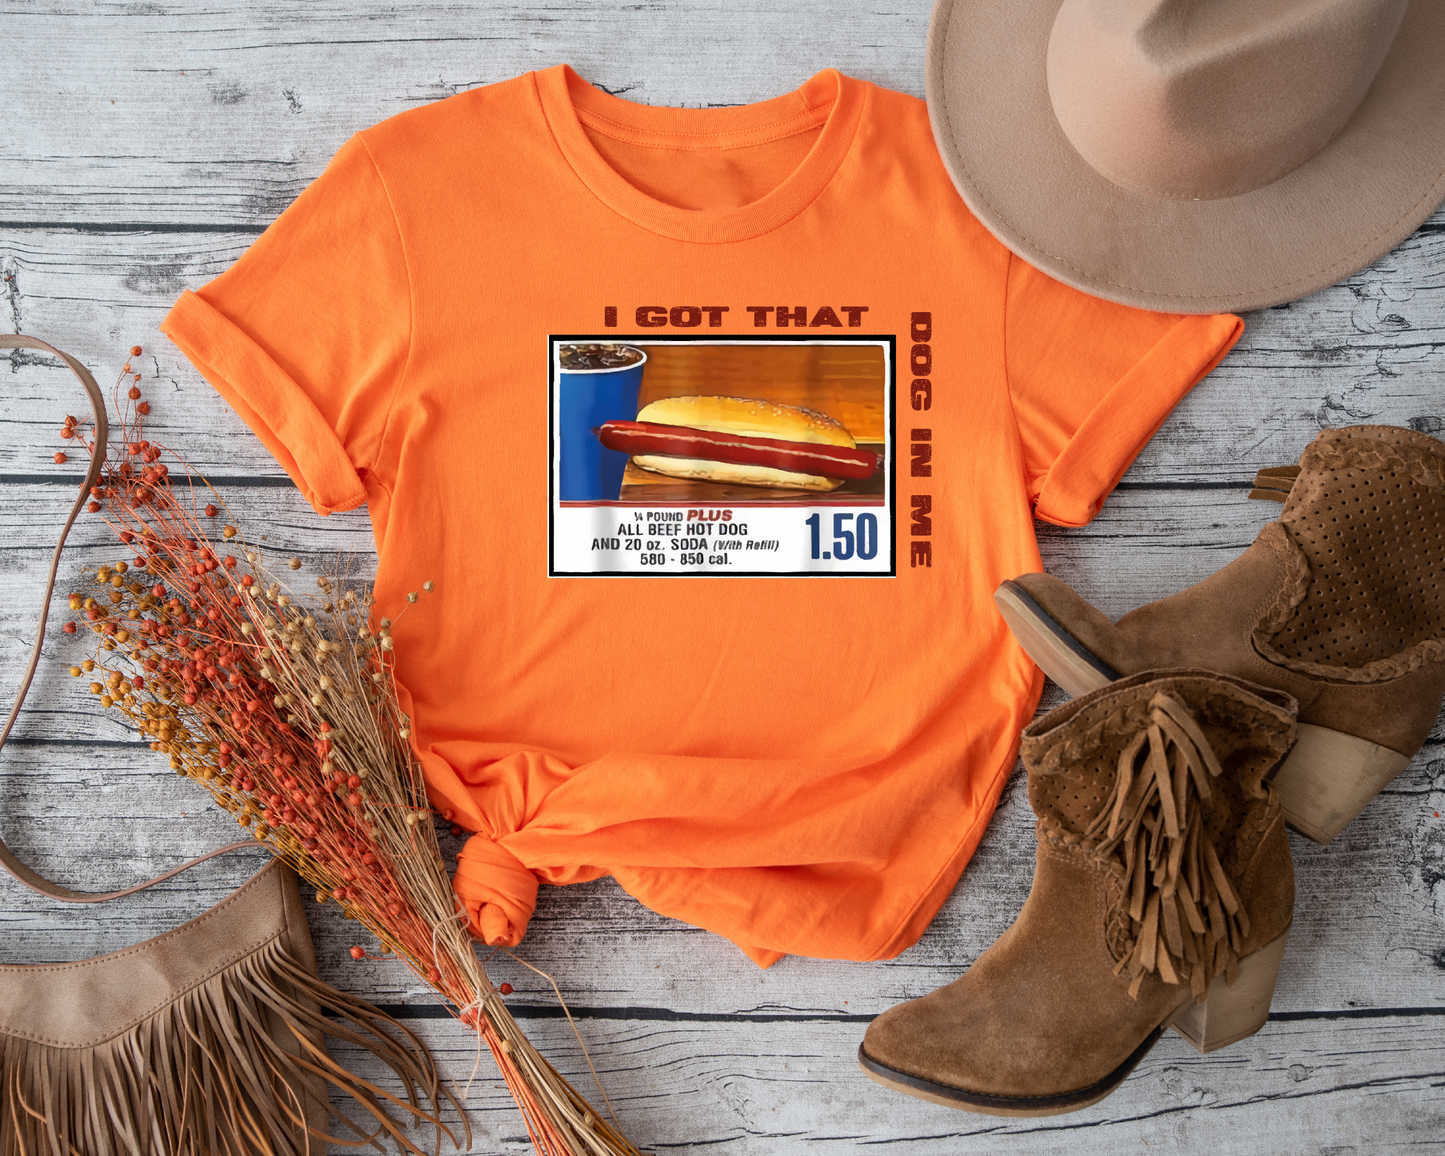 Add a touch of vintage fun to your wardrobe with this charming "I Got That Hot Dog In Me" t-shirt. 